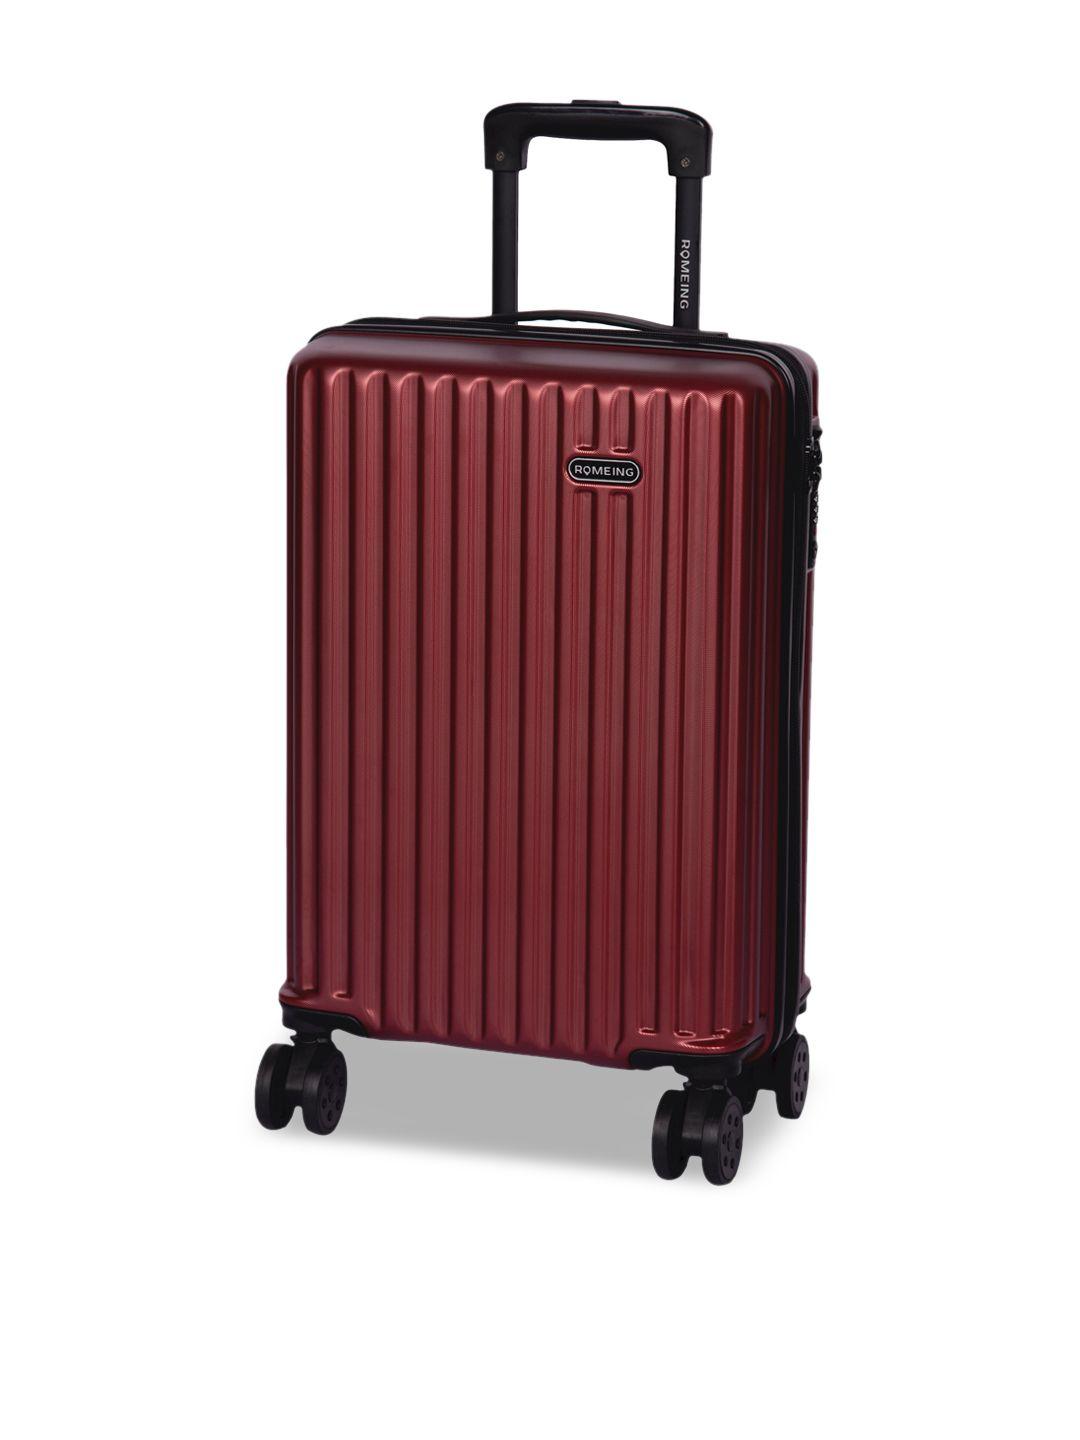 romeing genoa maroon textured hard sided polycarbonate cabin trolley bag